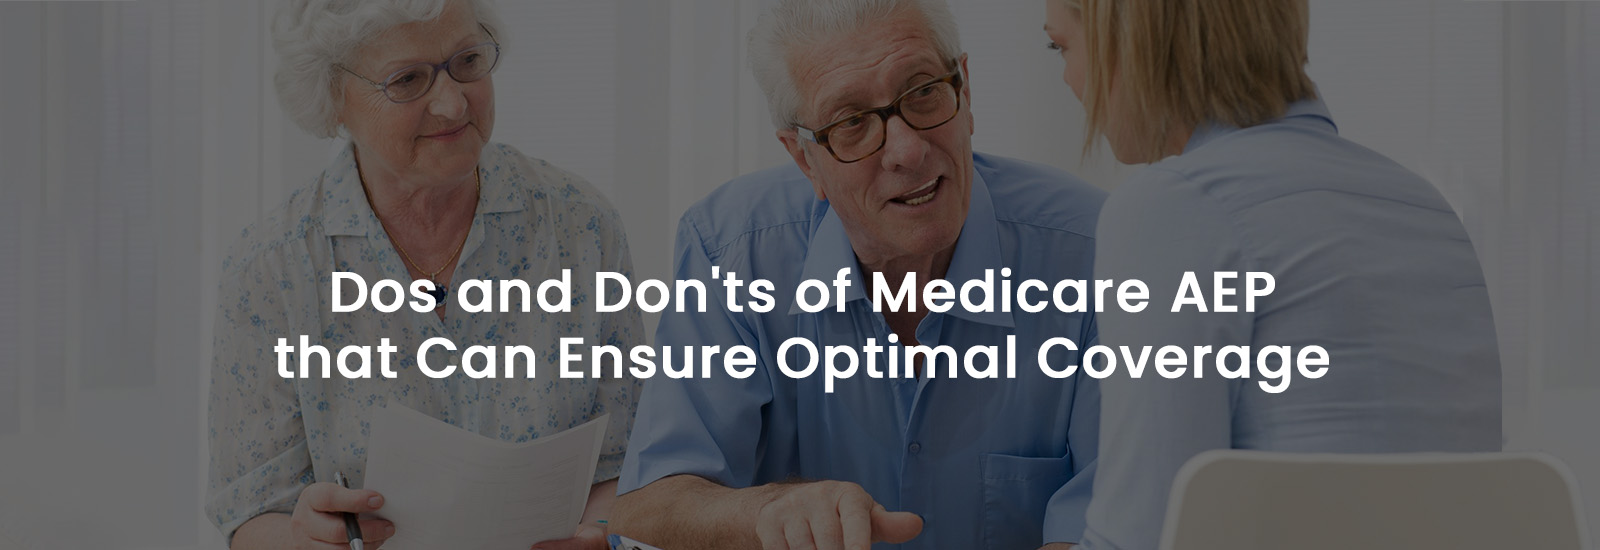 Dos and Don’ts of Medicare AEP that Can Ensure Optimal Coverage | Banner Image